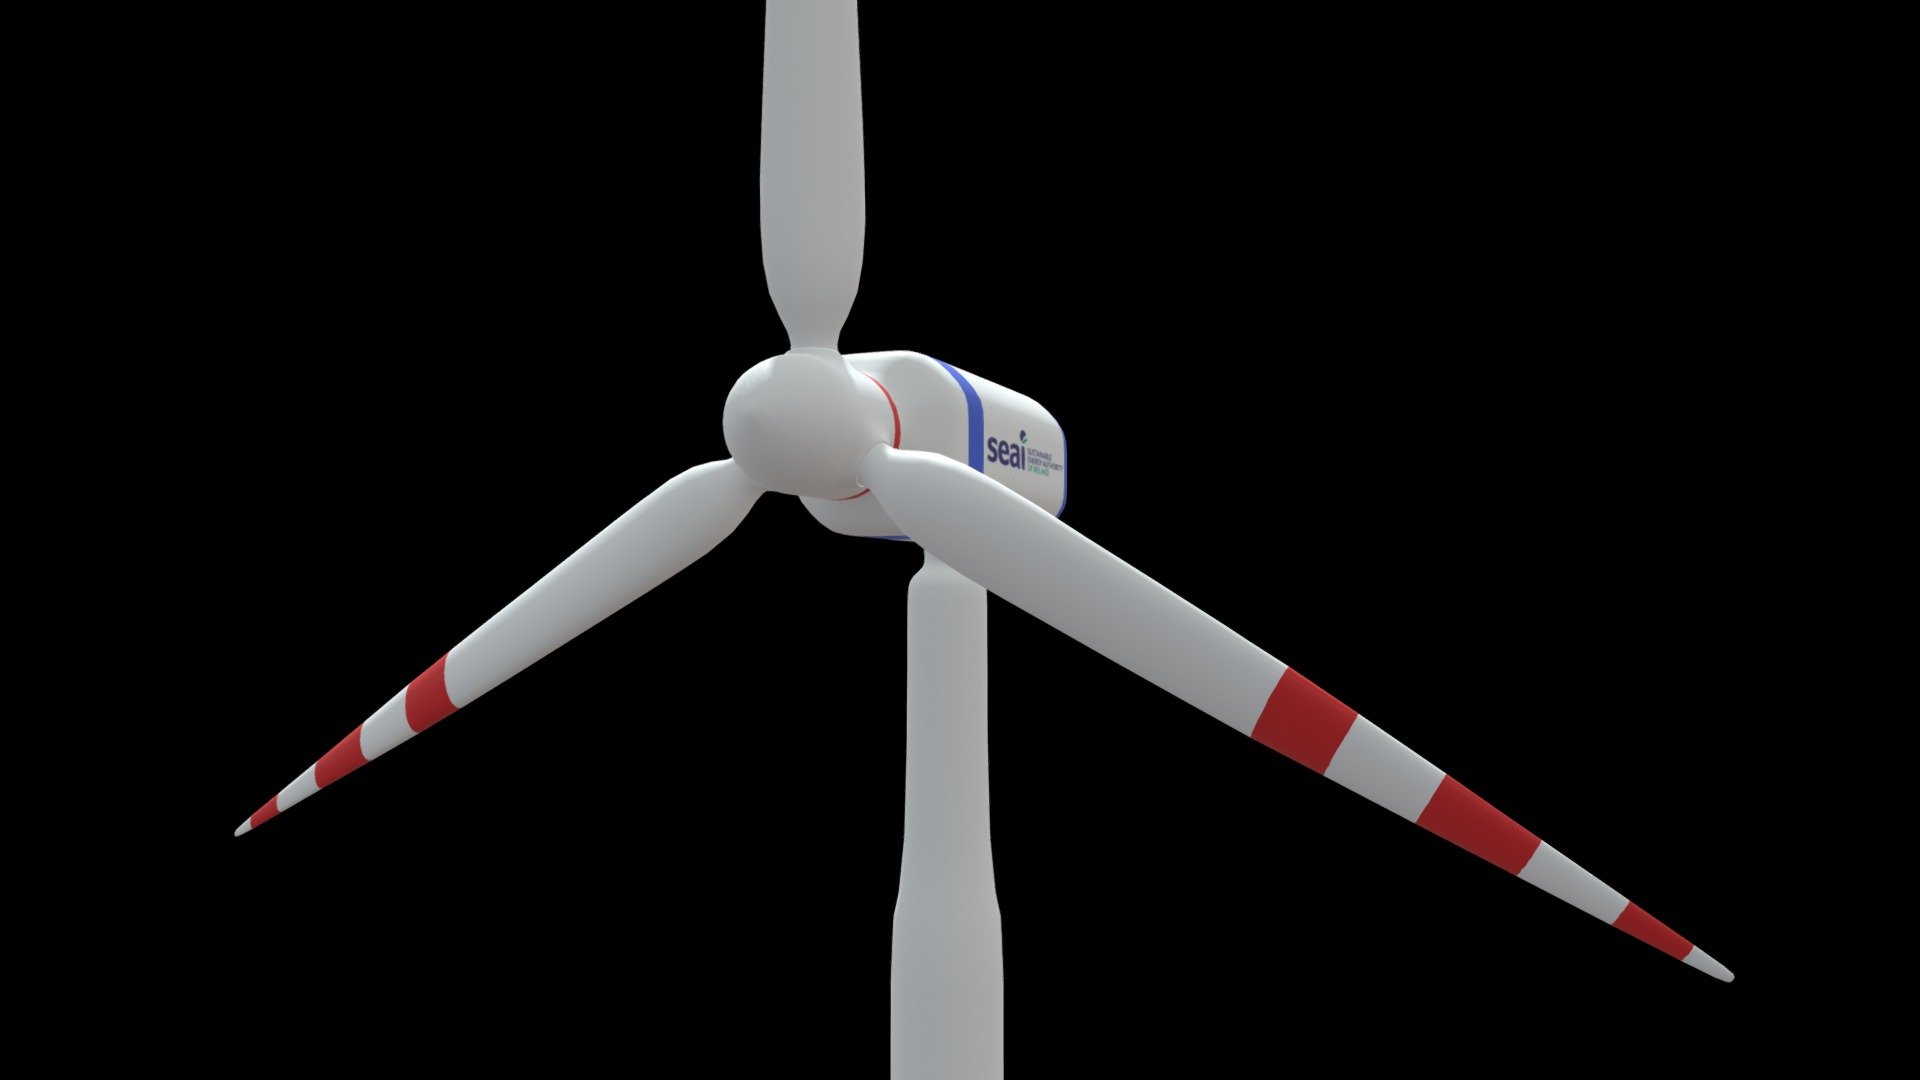 It's a simple wind turine with rotatable blades, made in Blender.

Relatively low poly, rigged, ready as a game asset, tested in Unity 3d model